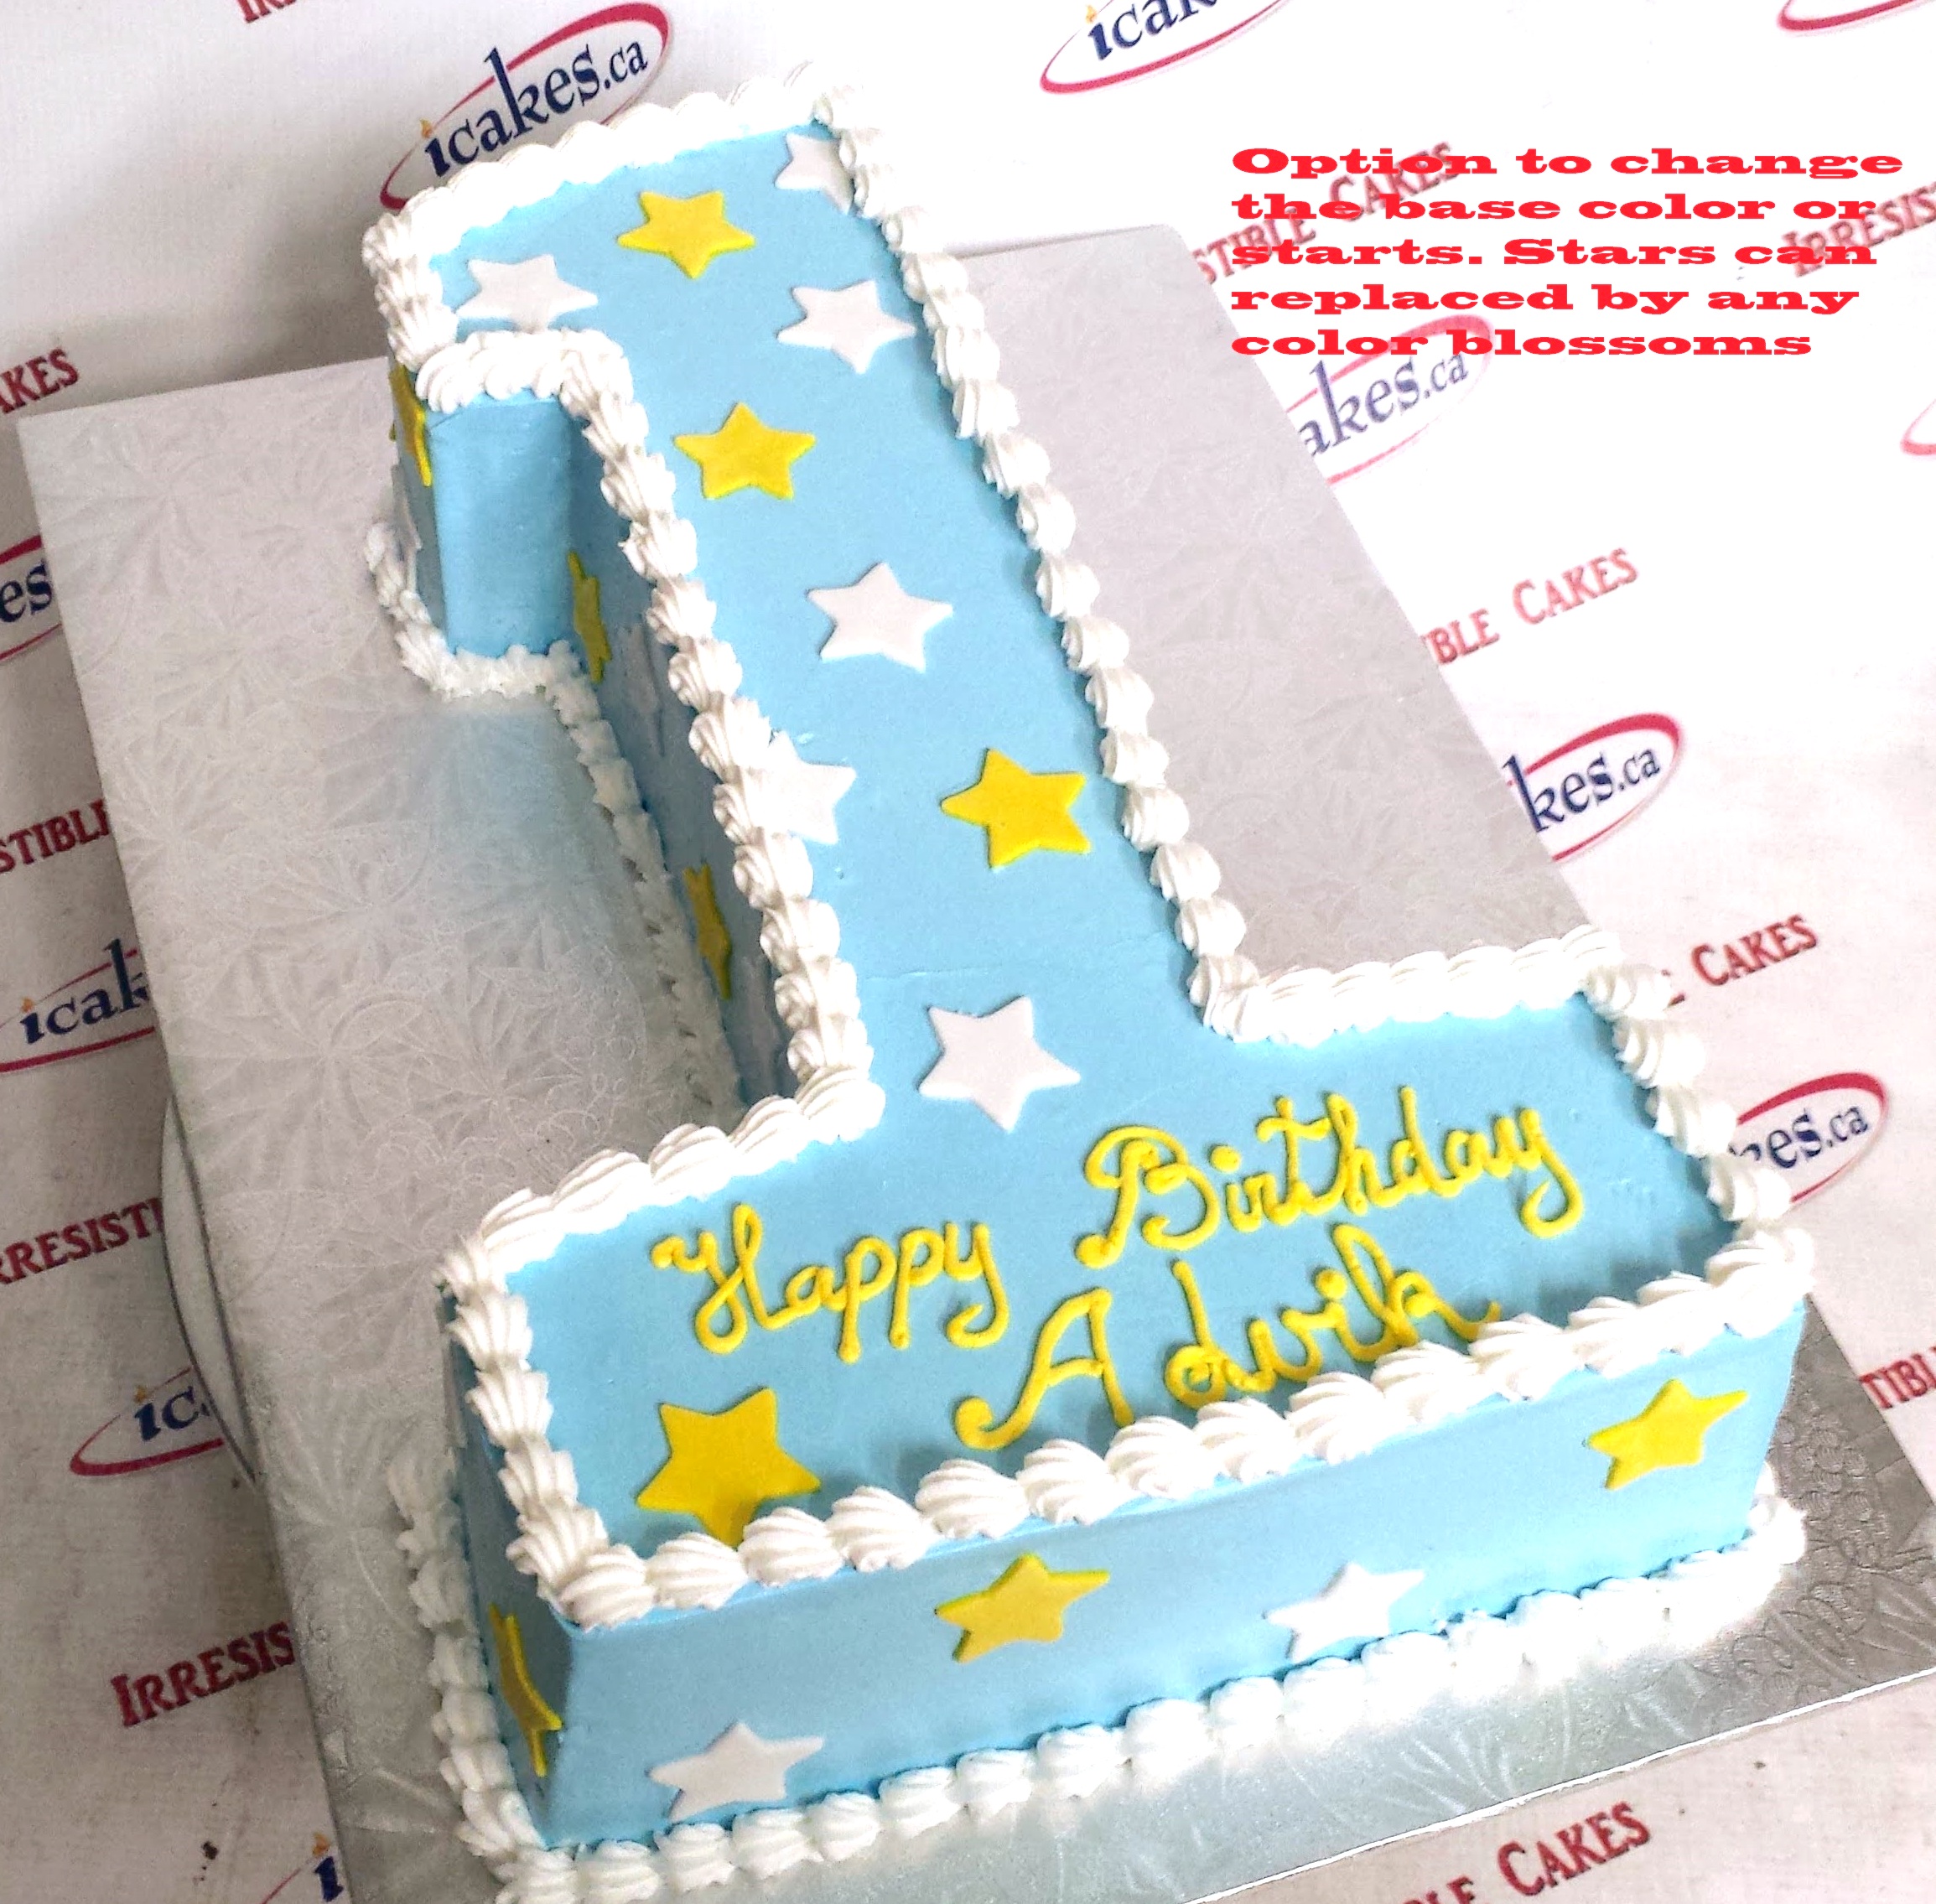 No. 1 Shaped cake with lovely butterflies - Picture of Cakes & Treats,  Tiruchirappalli - Tripadvisor